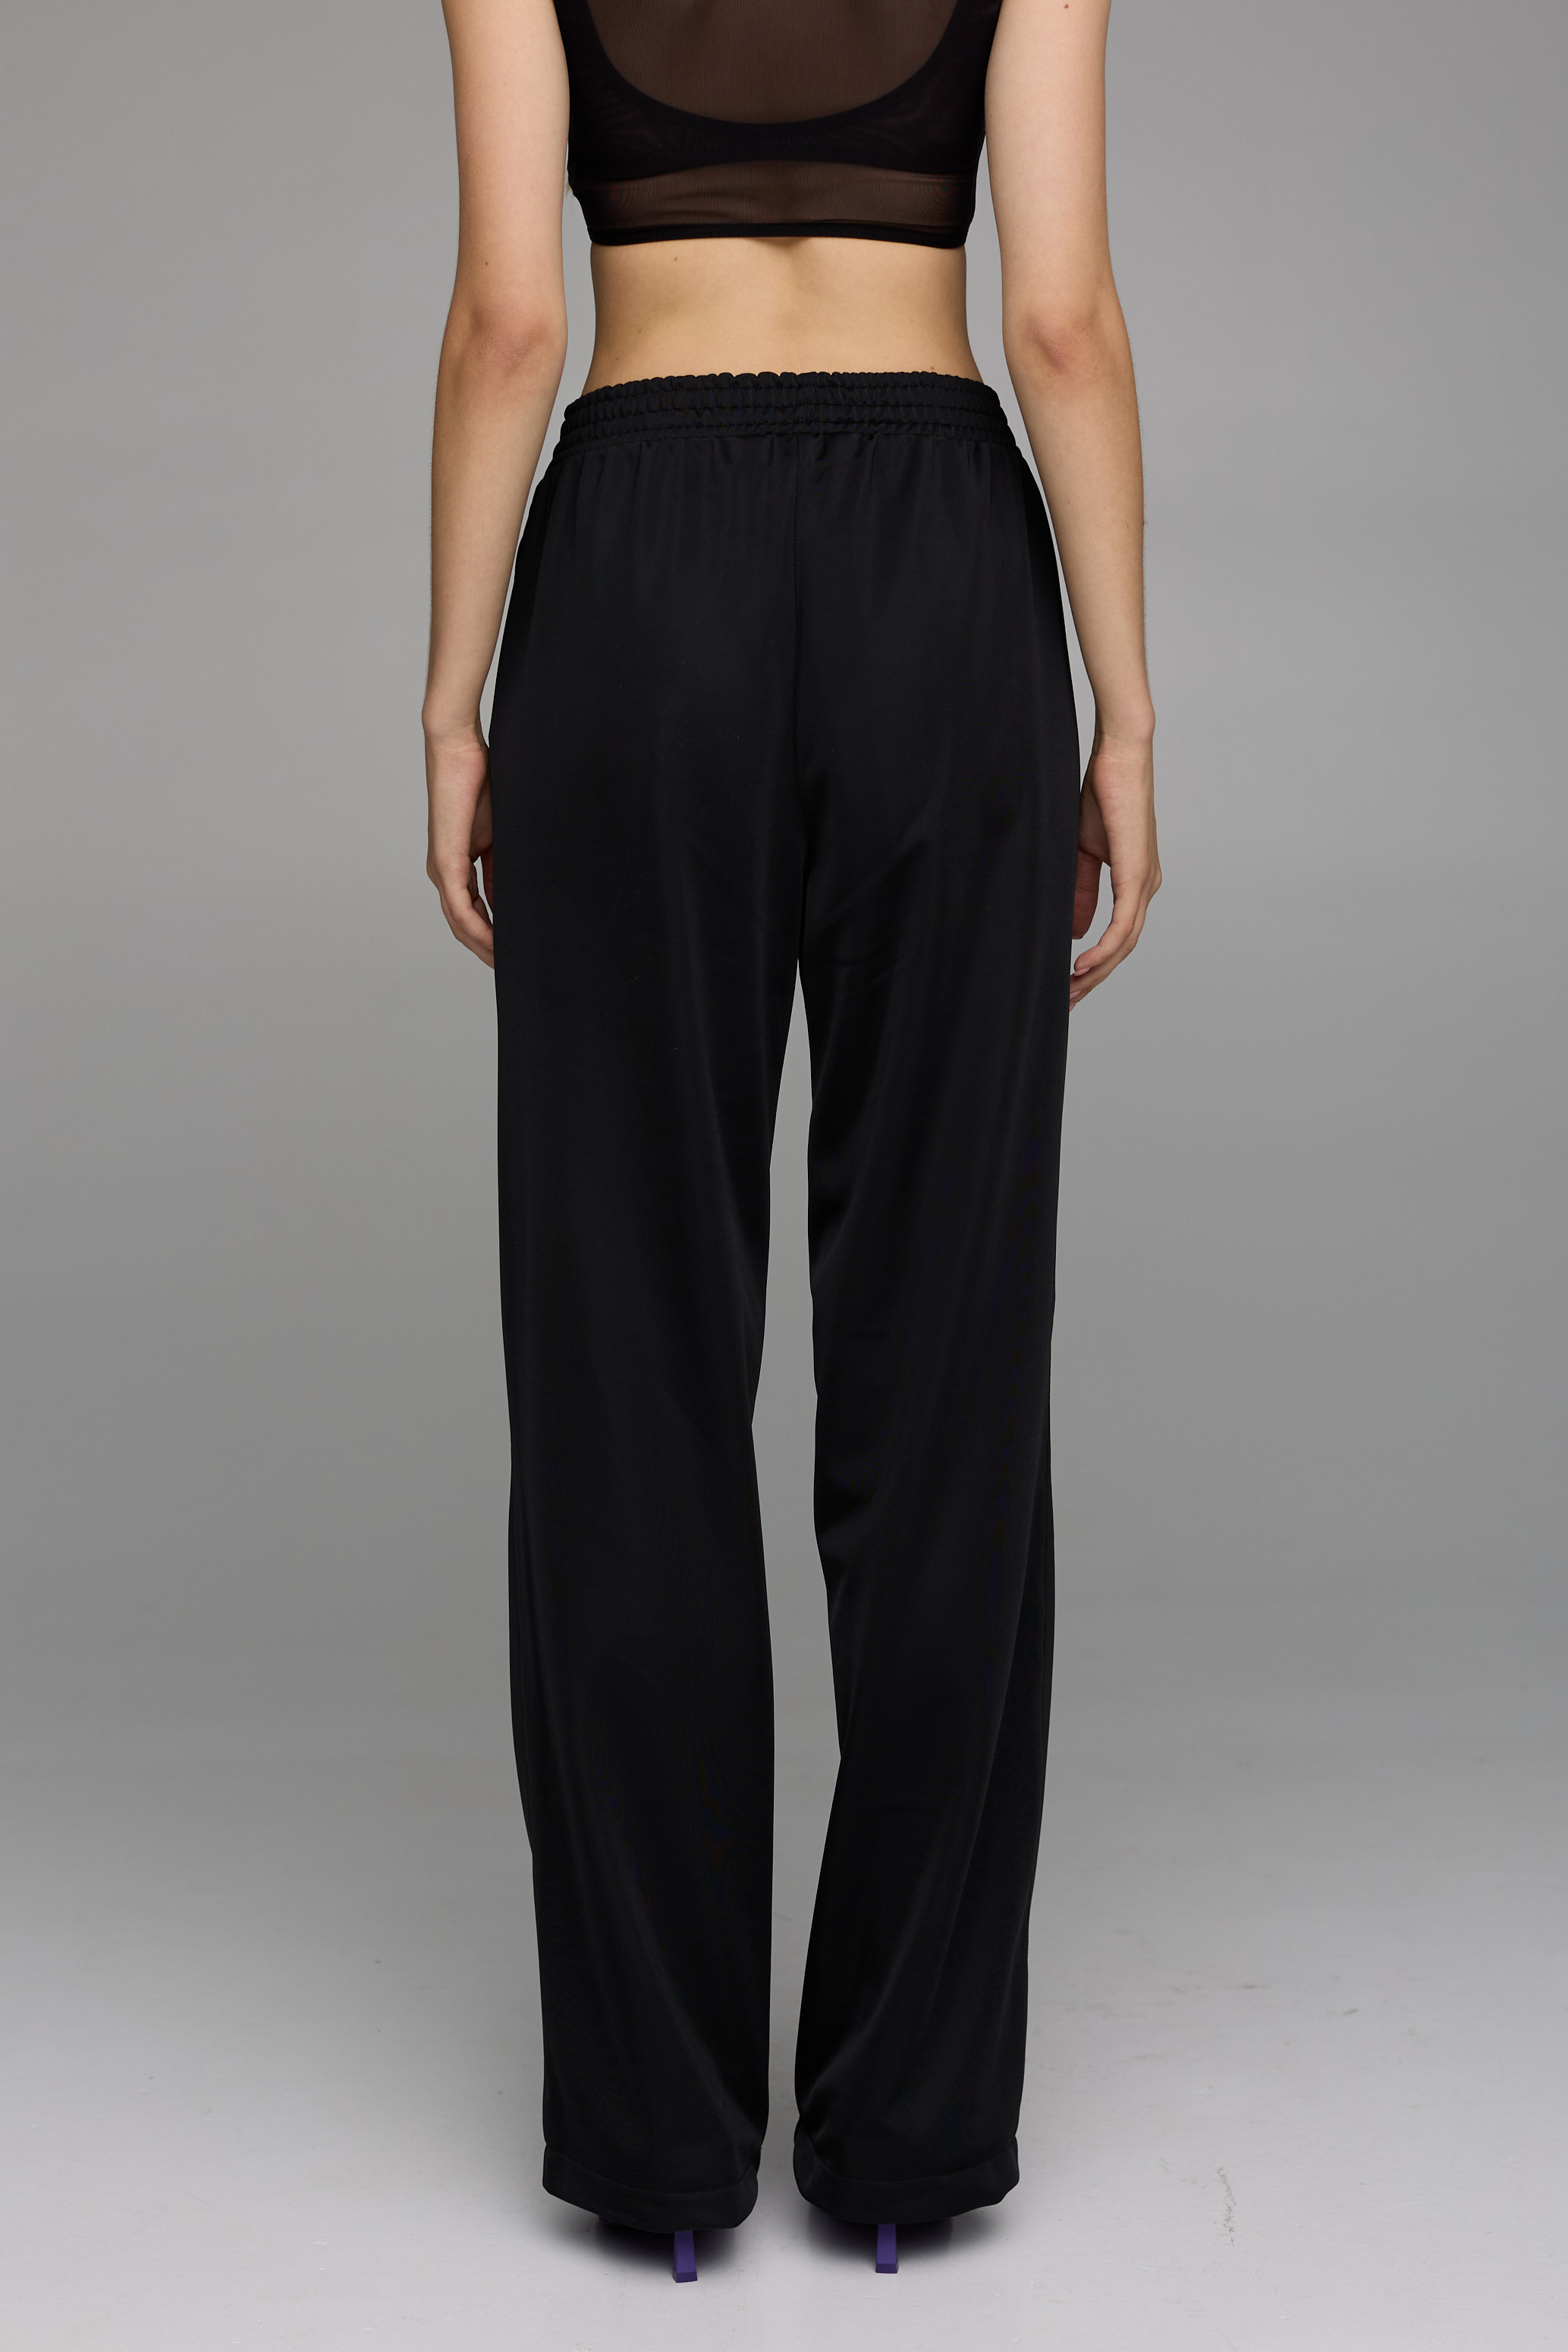 trousers athletic in black color